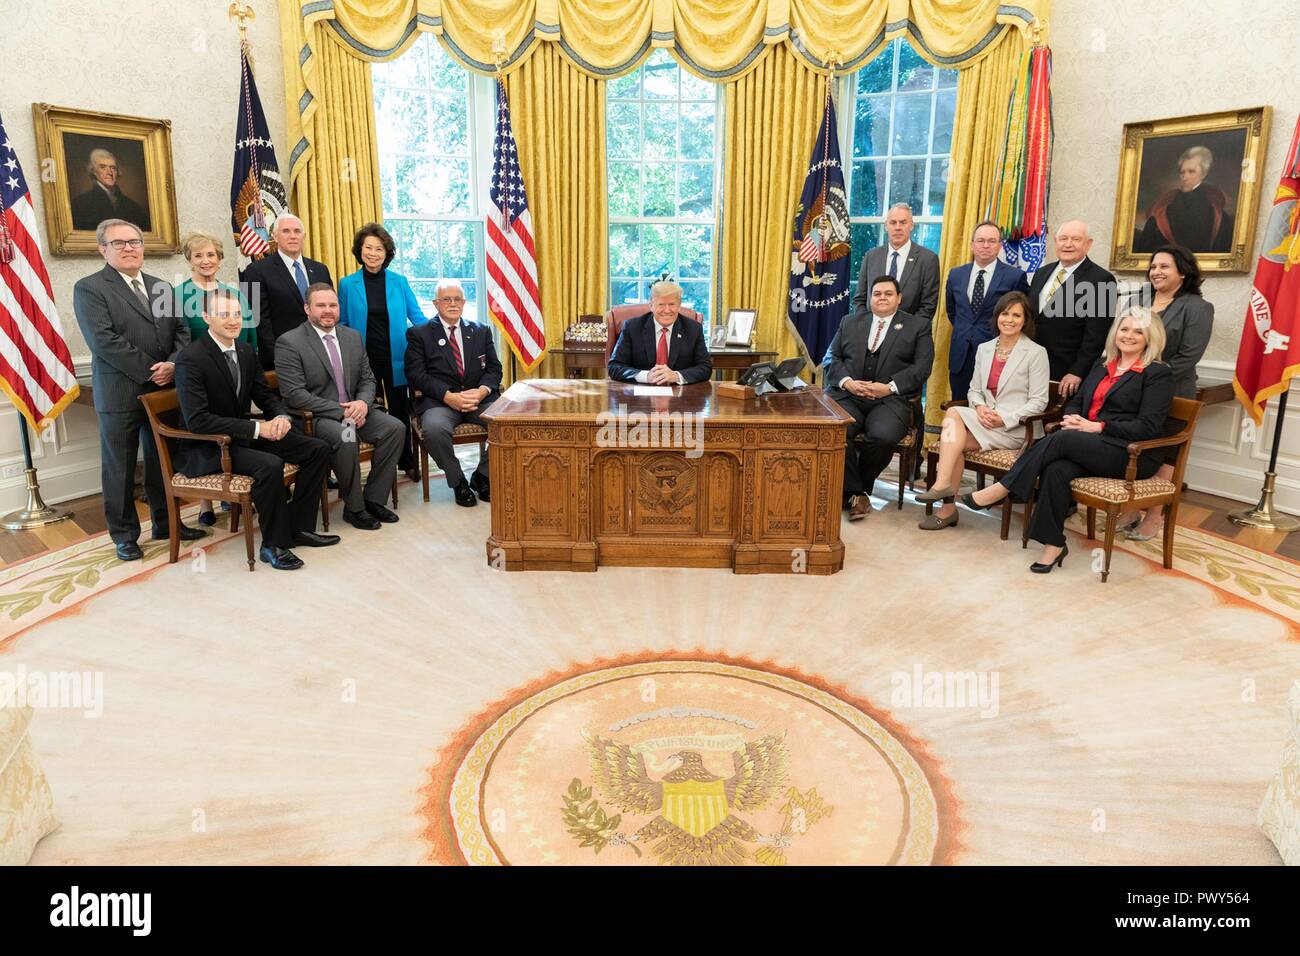 U.S President Donald Trump, joined by Vice President Mike Pence and members of his Cabinet pose for a group photo after the “Cutting the Red Tape and Unleashing Economic Freedom” event in the Oval Office of the White House October 17, 2018 in Washington, DC. Stock Photo